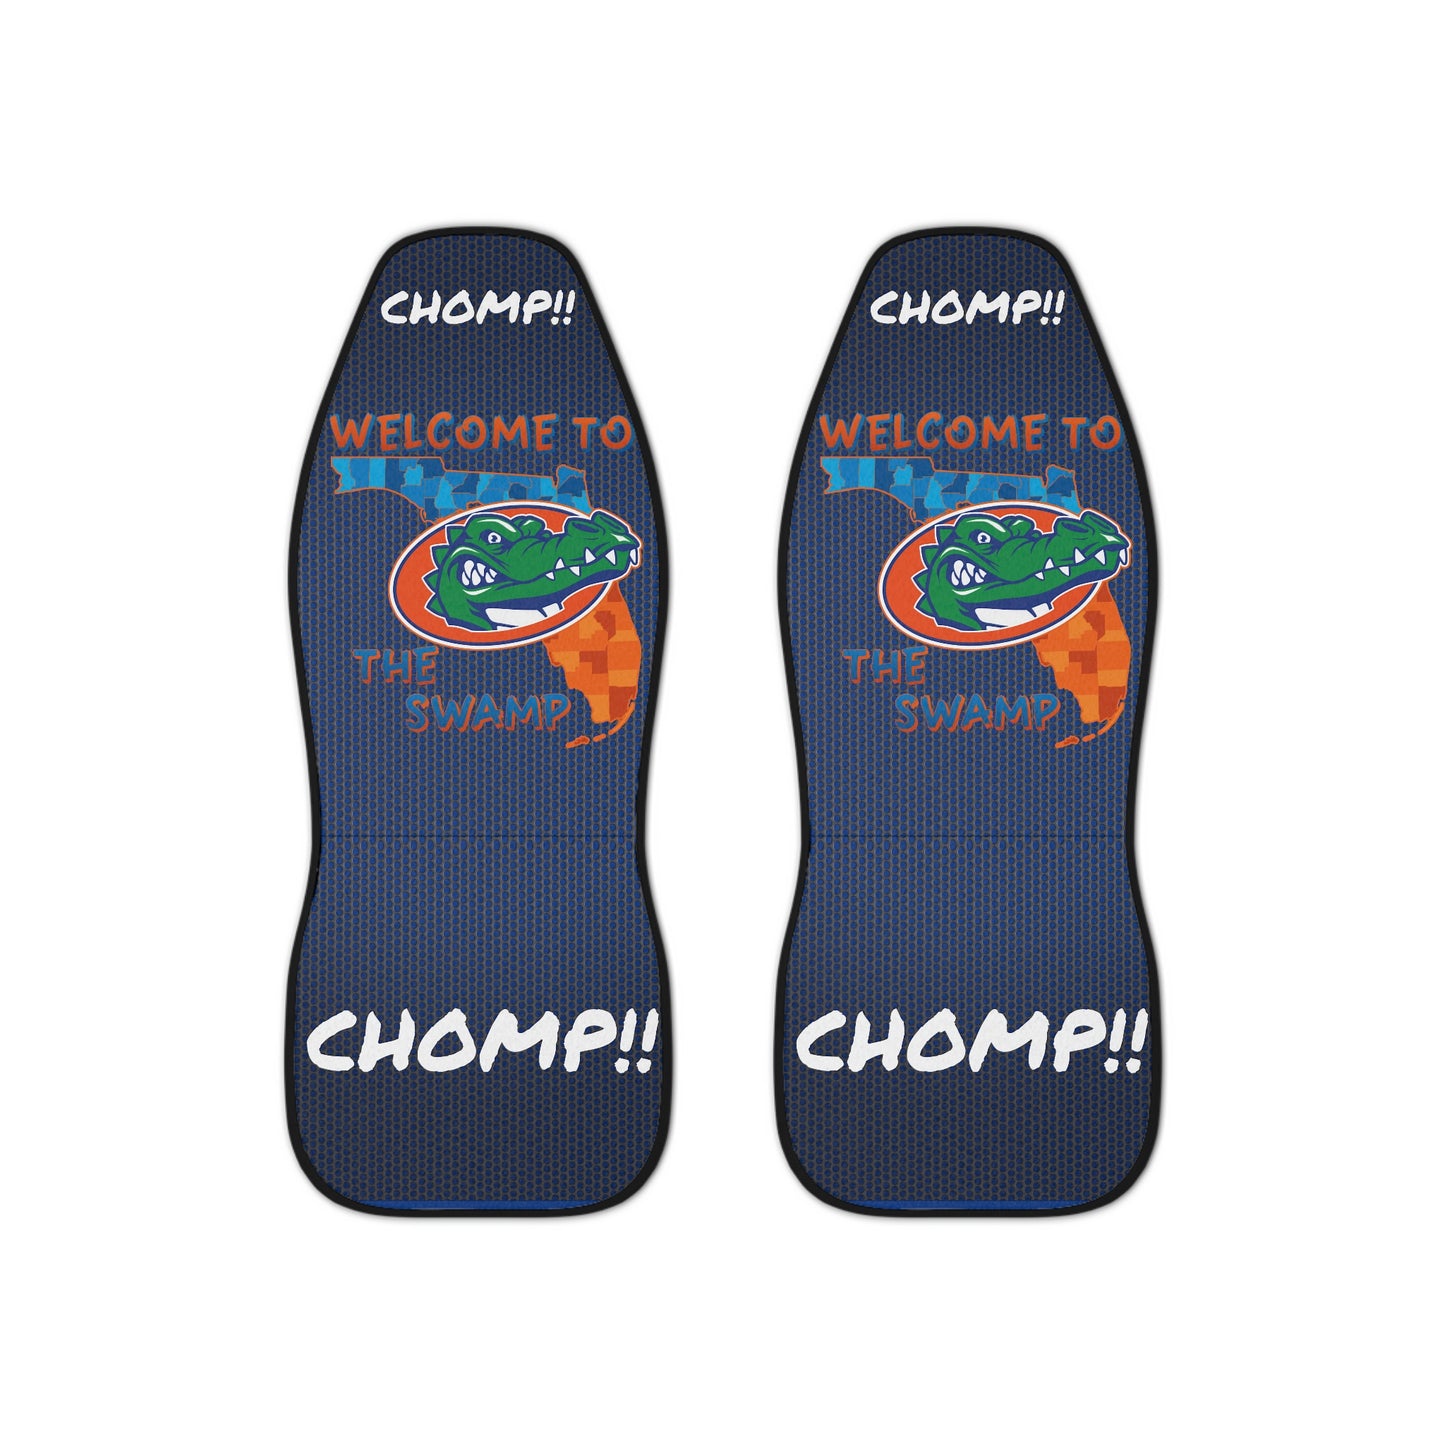 Welcome to the Swamp Car Seat Covers